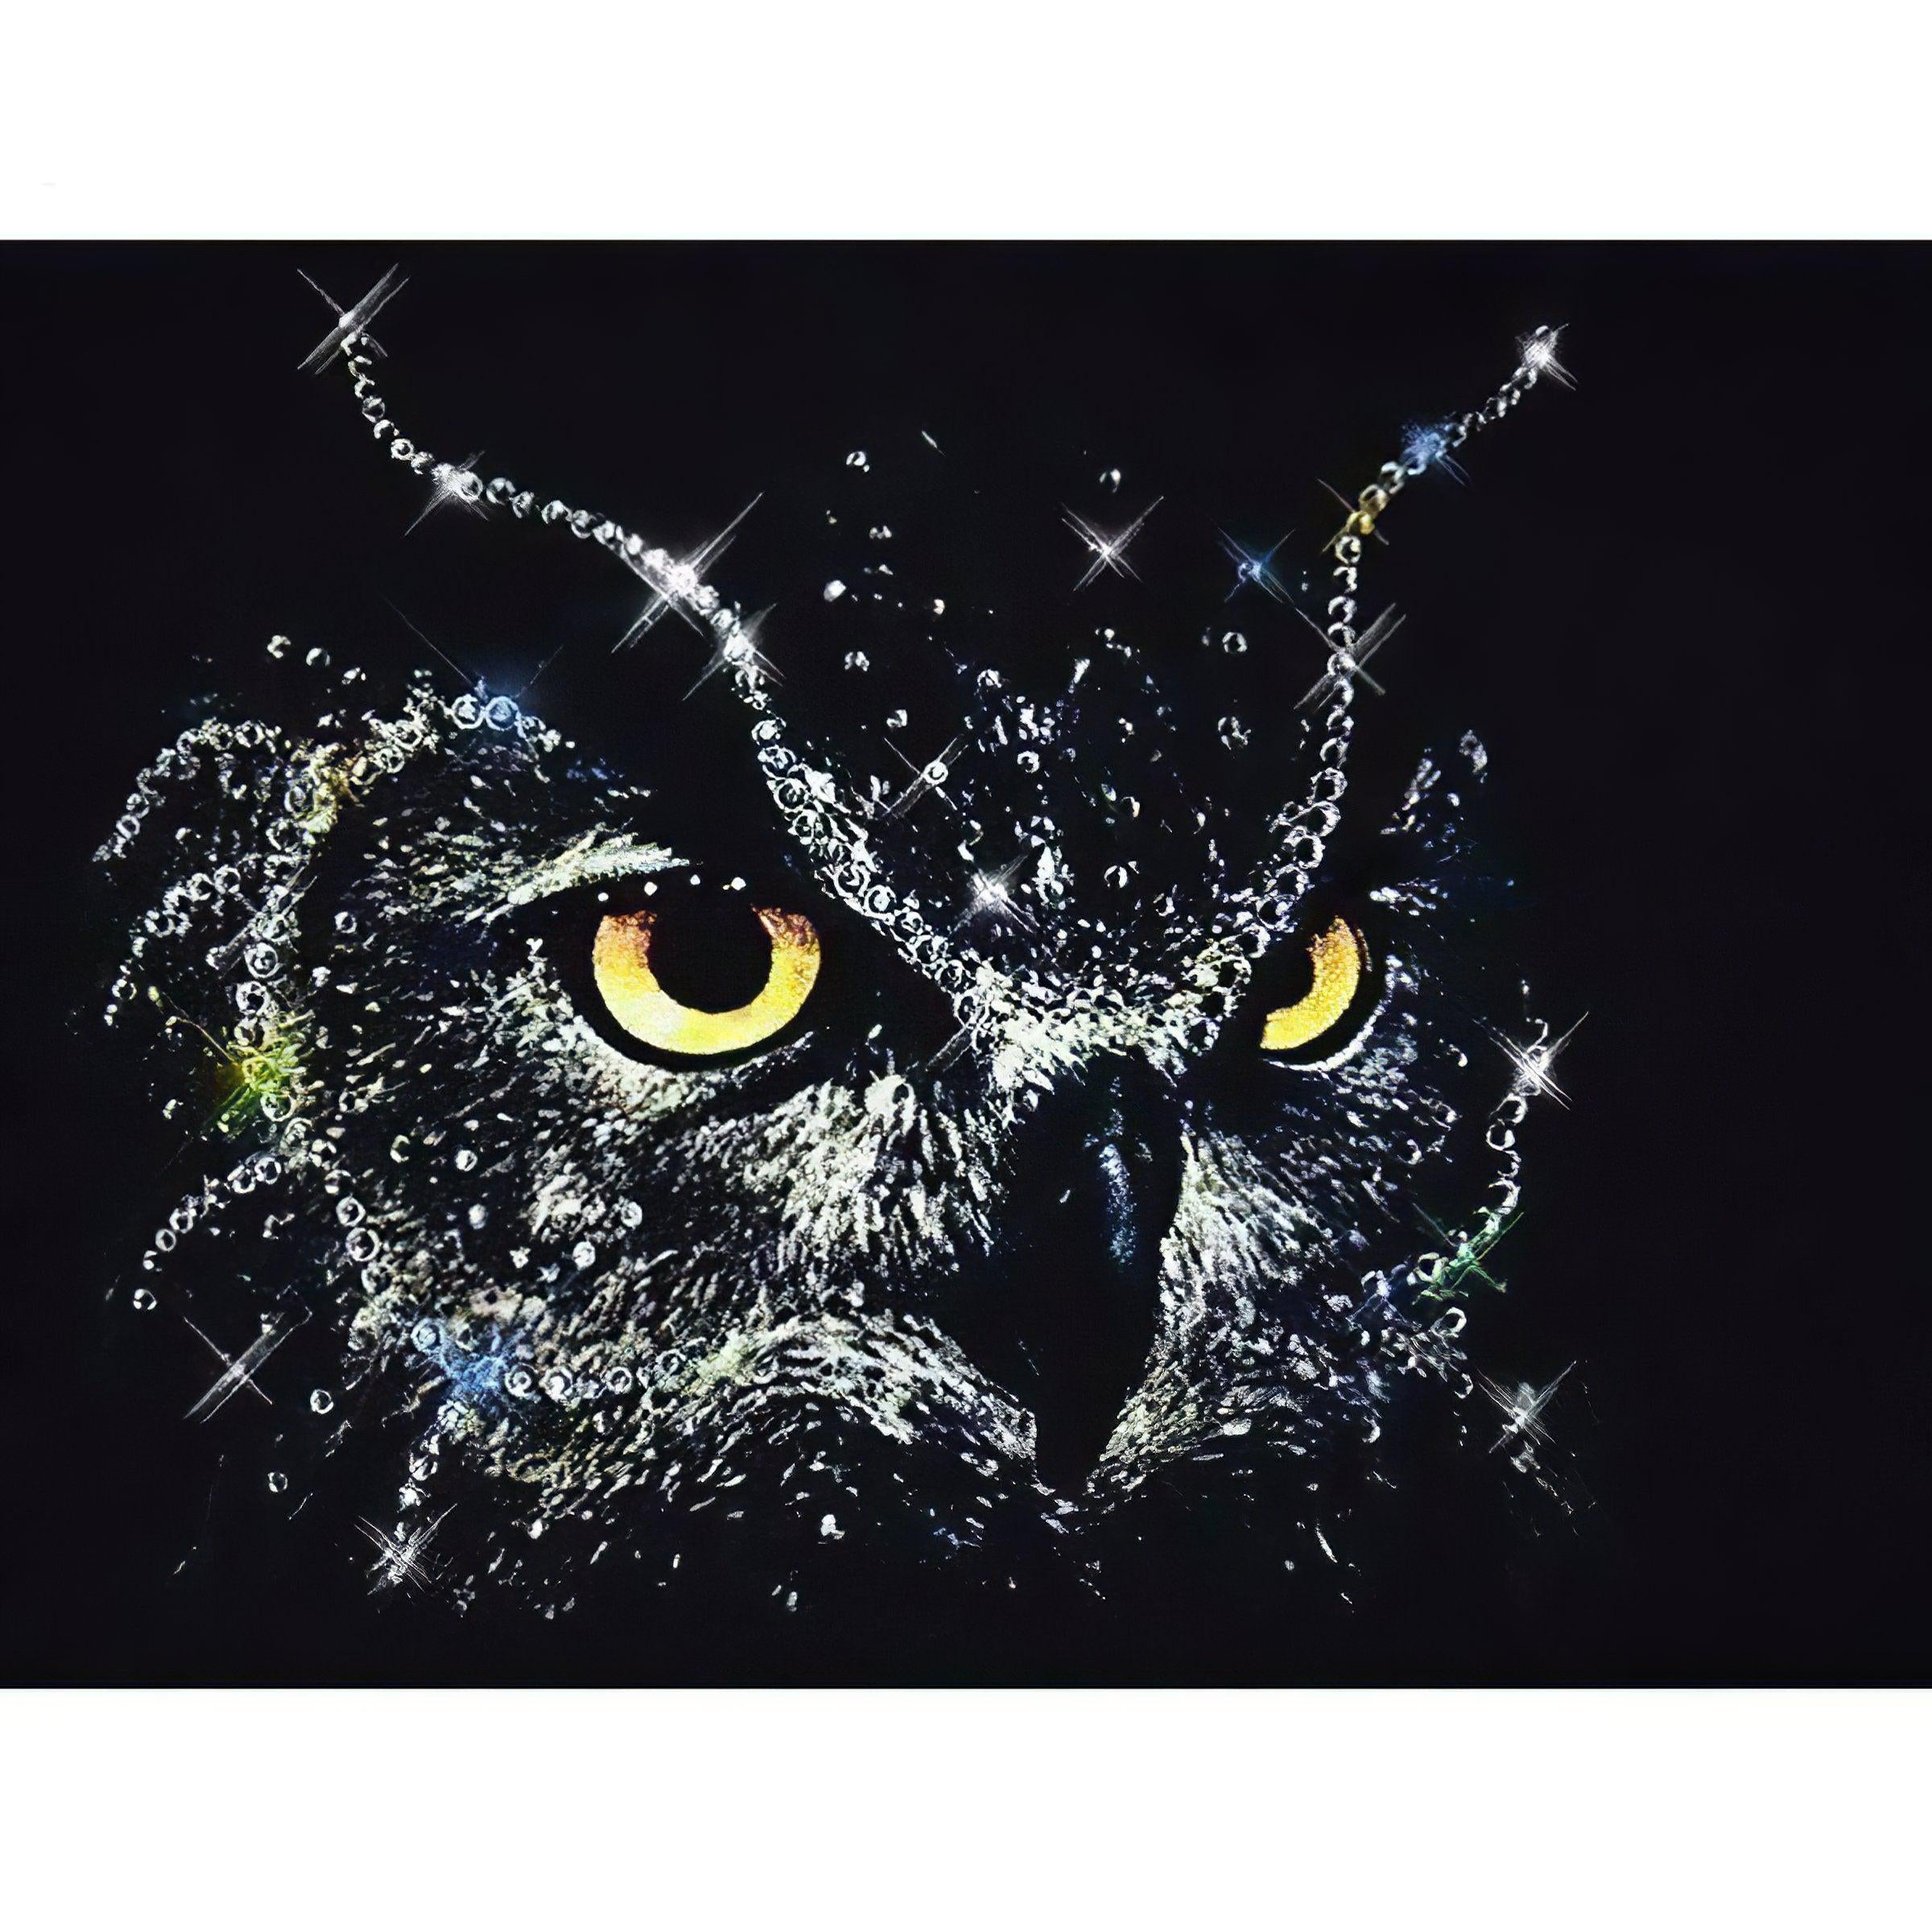 The wise black owl, an icon of knowledge shrouded in darkness. Black Owl - Diamondartlove